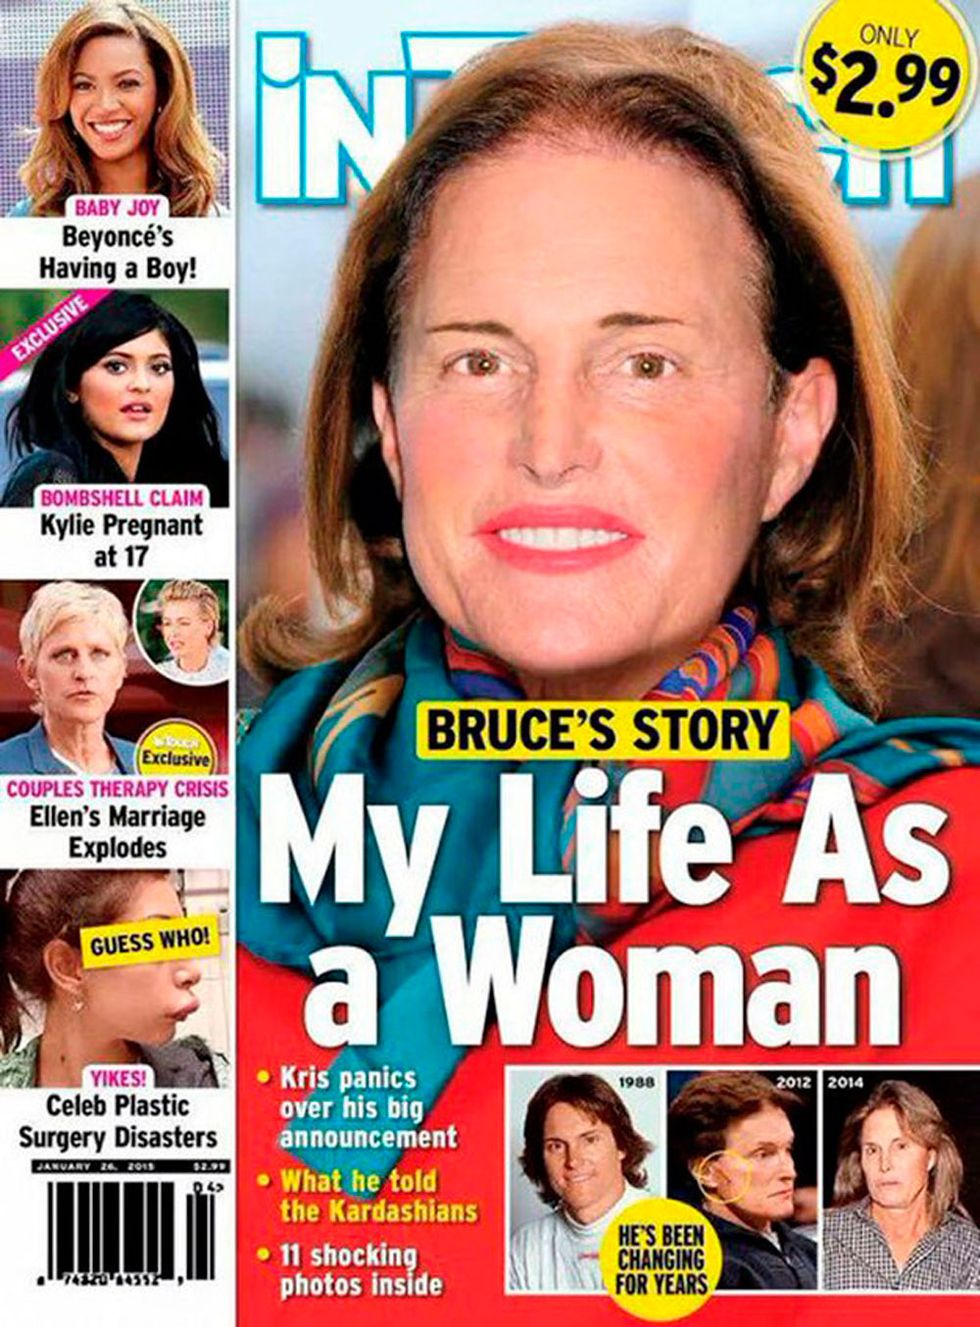 InTouch's Photoshopped Bruce Jenner cover is absolutely ridiculous